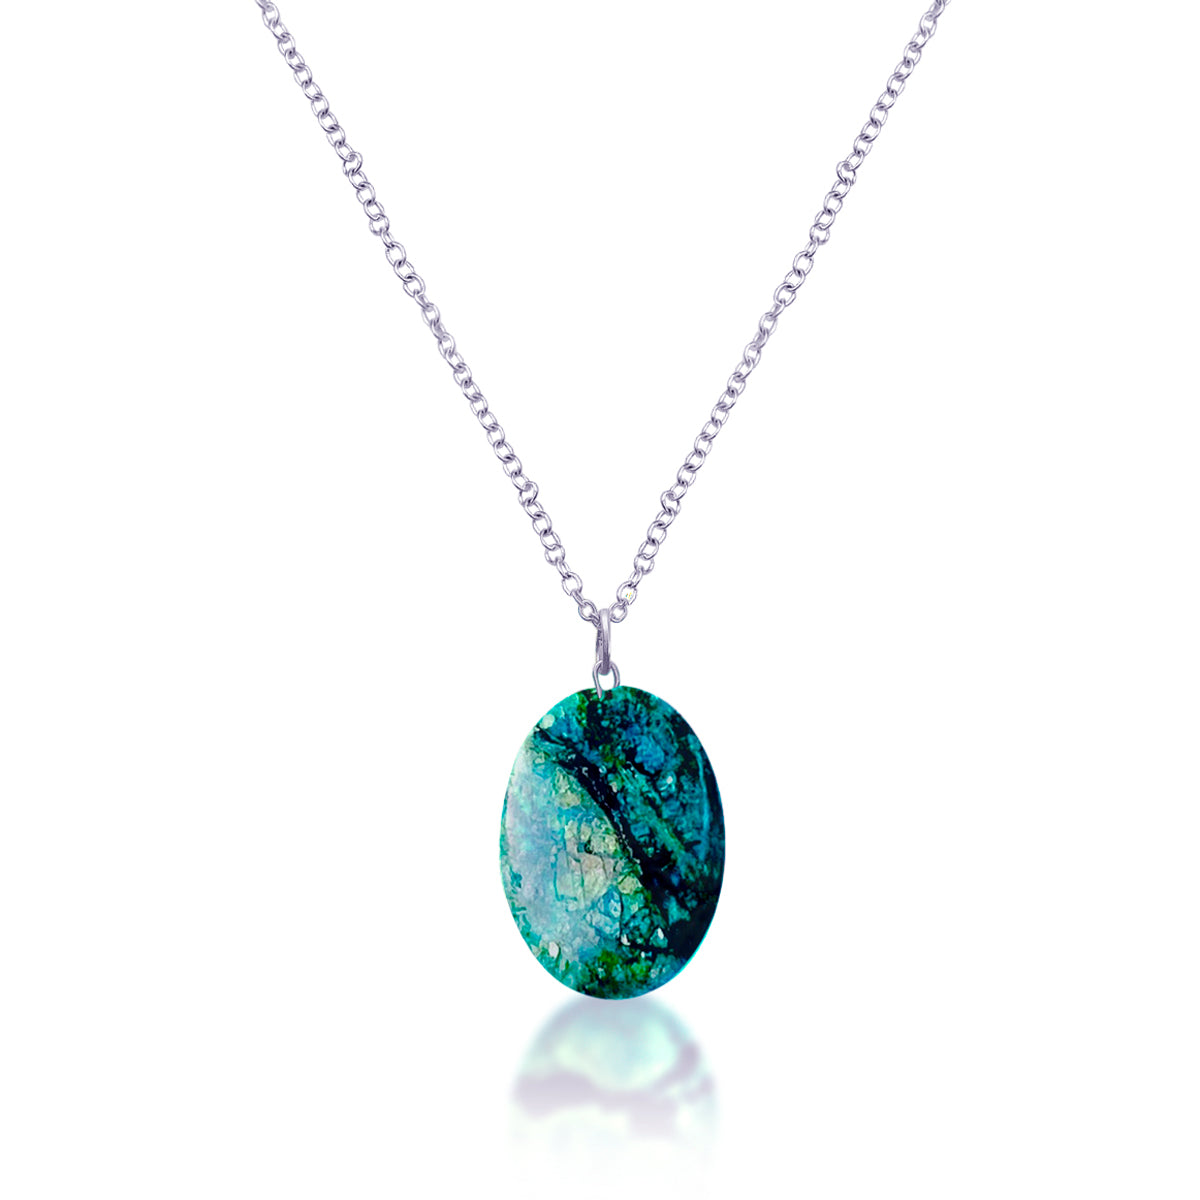 Opal Necklace to Encourage Your Independence